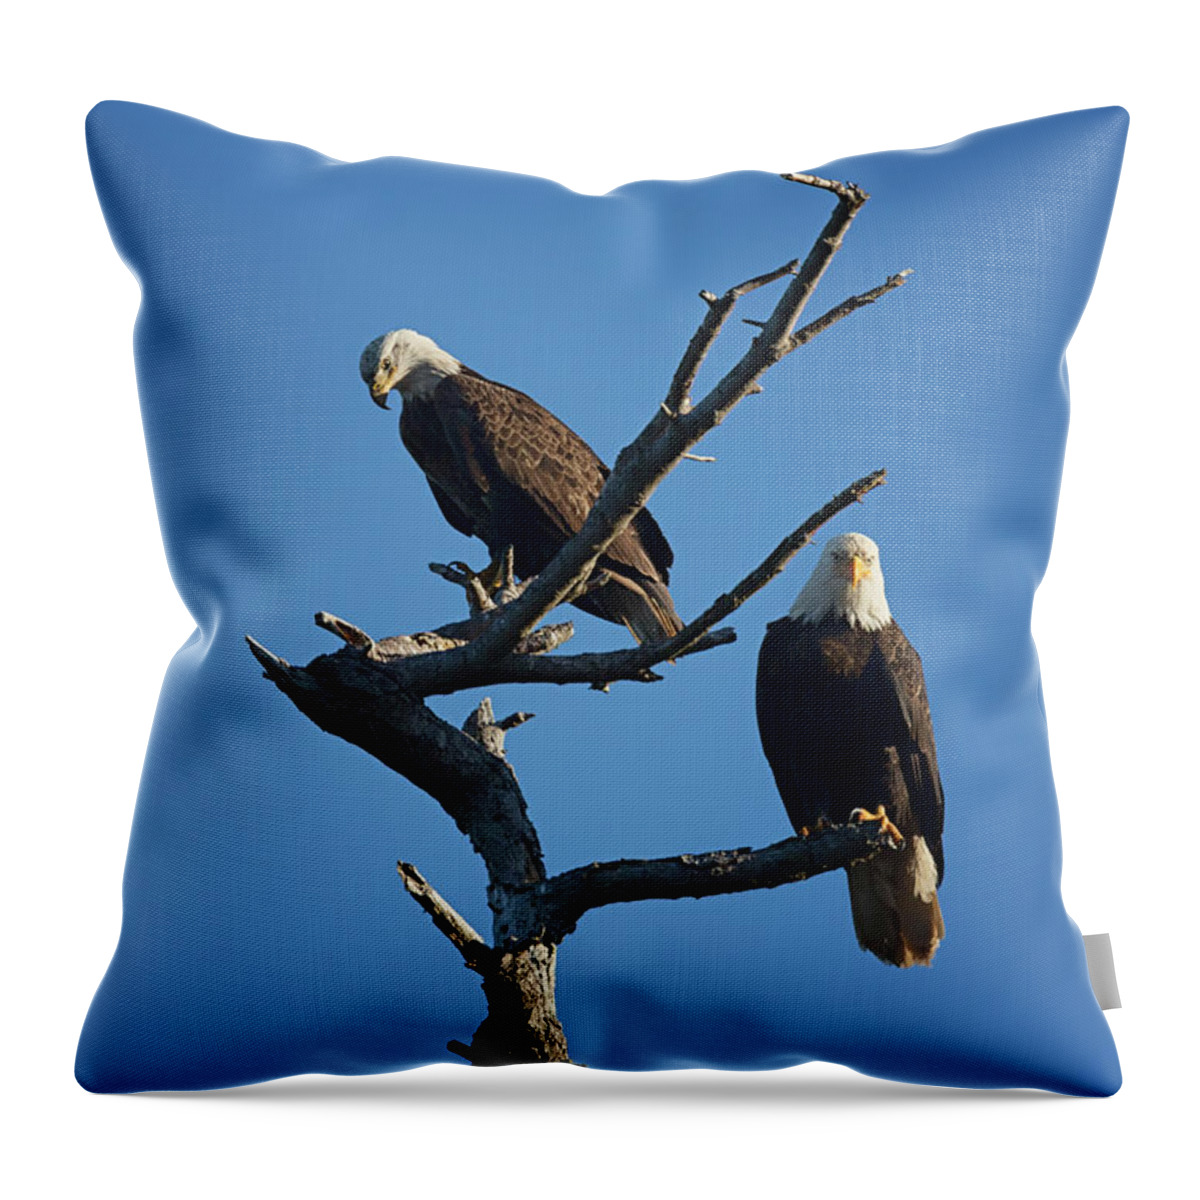 Bald Eagles Throw Pillow featuring the photograph Bald Eagles by Randy Hall